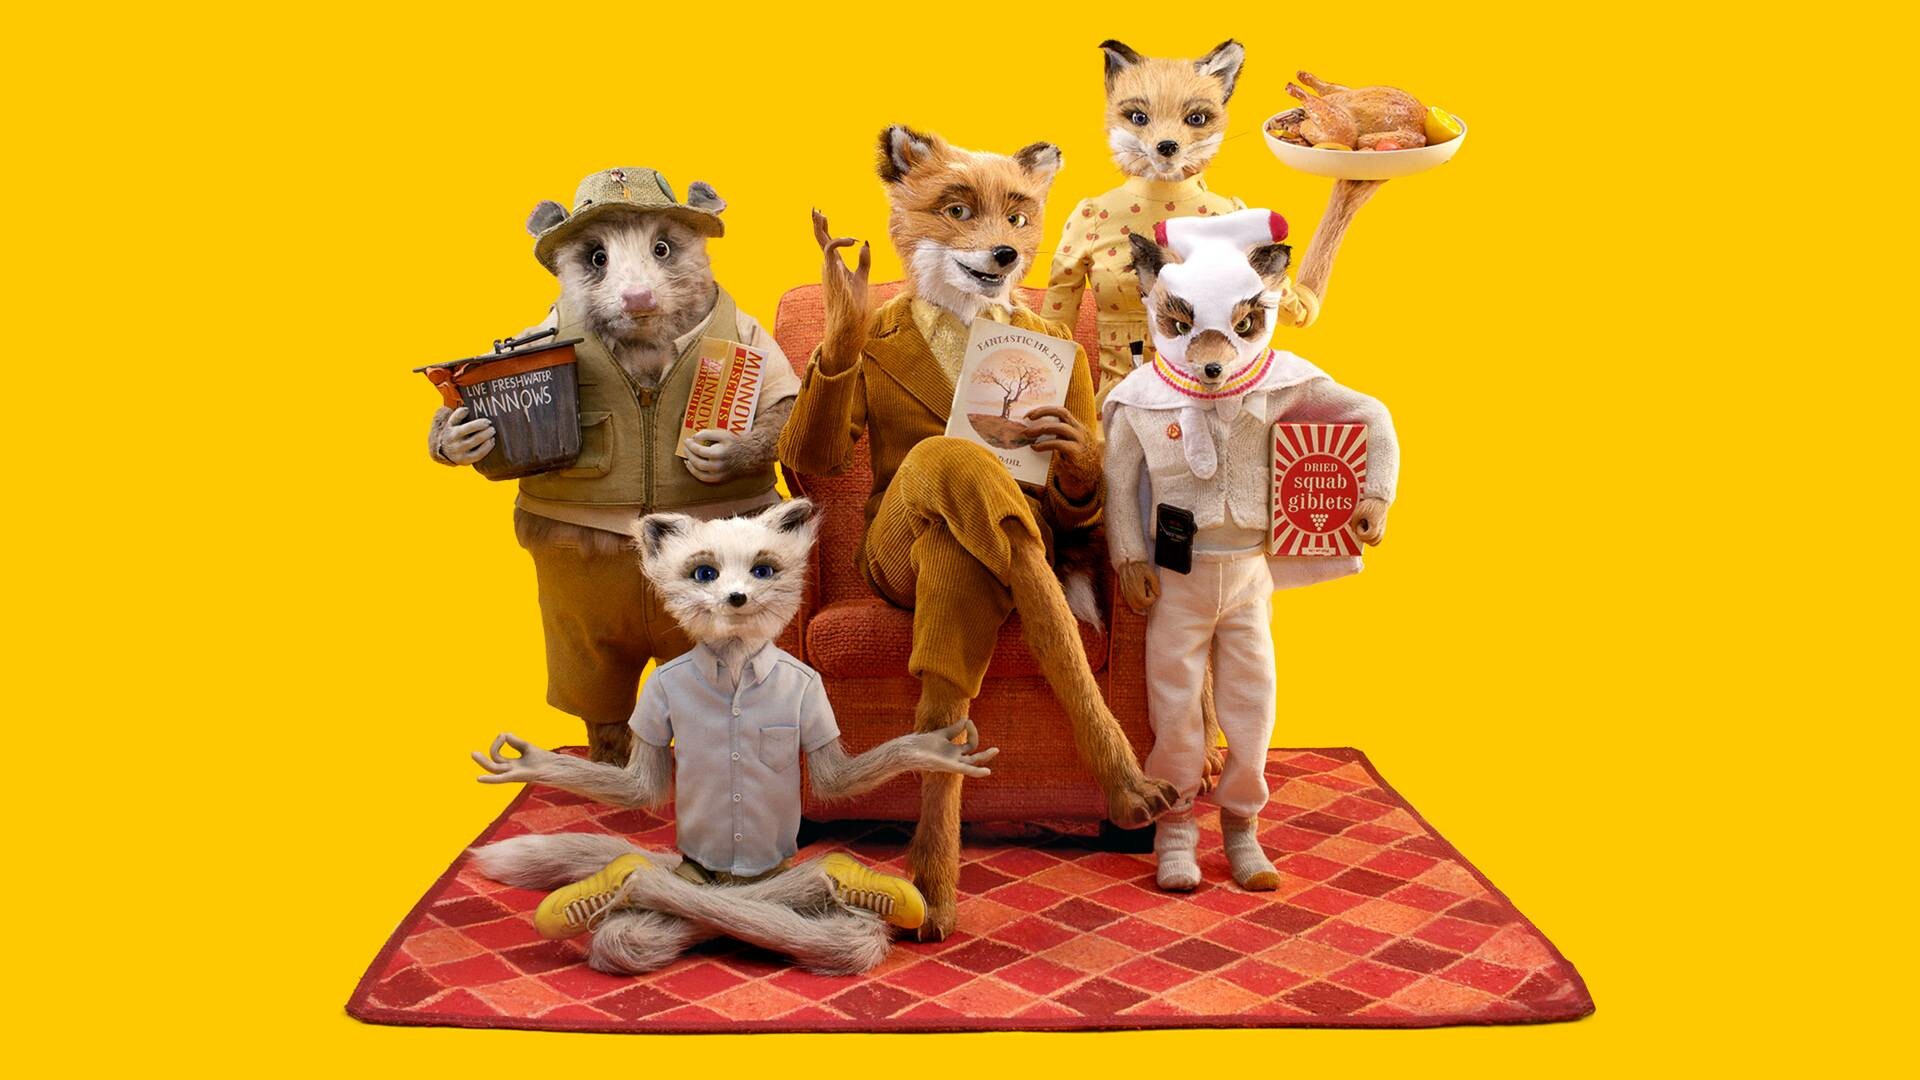 Fantastic Mr. Fox, Quirky Charm, Stop-motion Animation, Wes Anderson's Genius, 1920x1080 Full HD Desktop